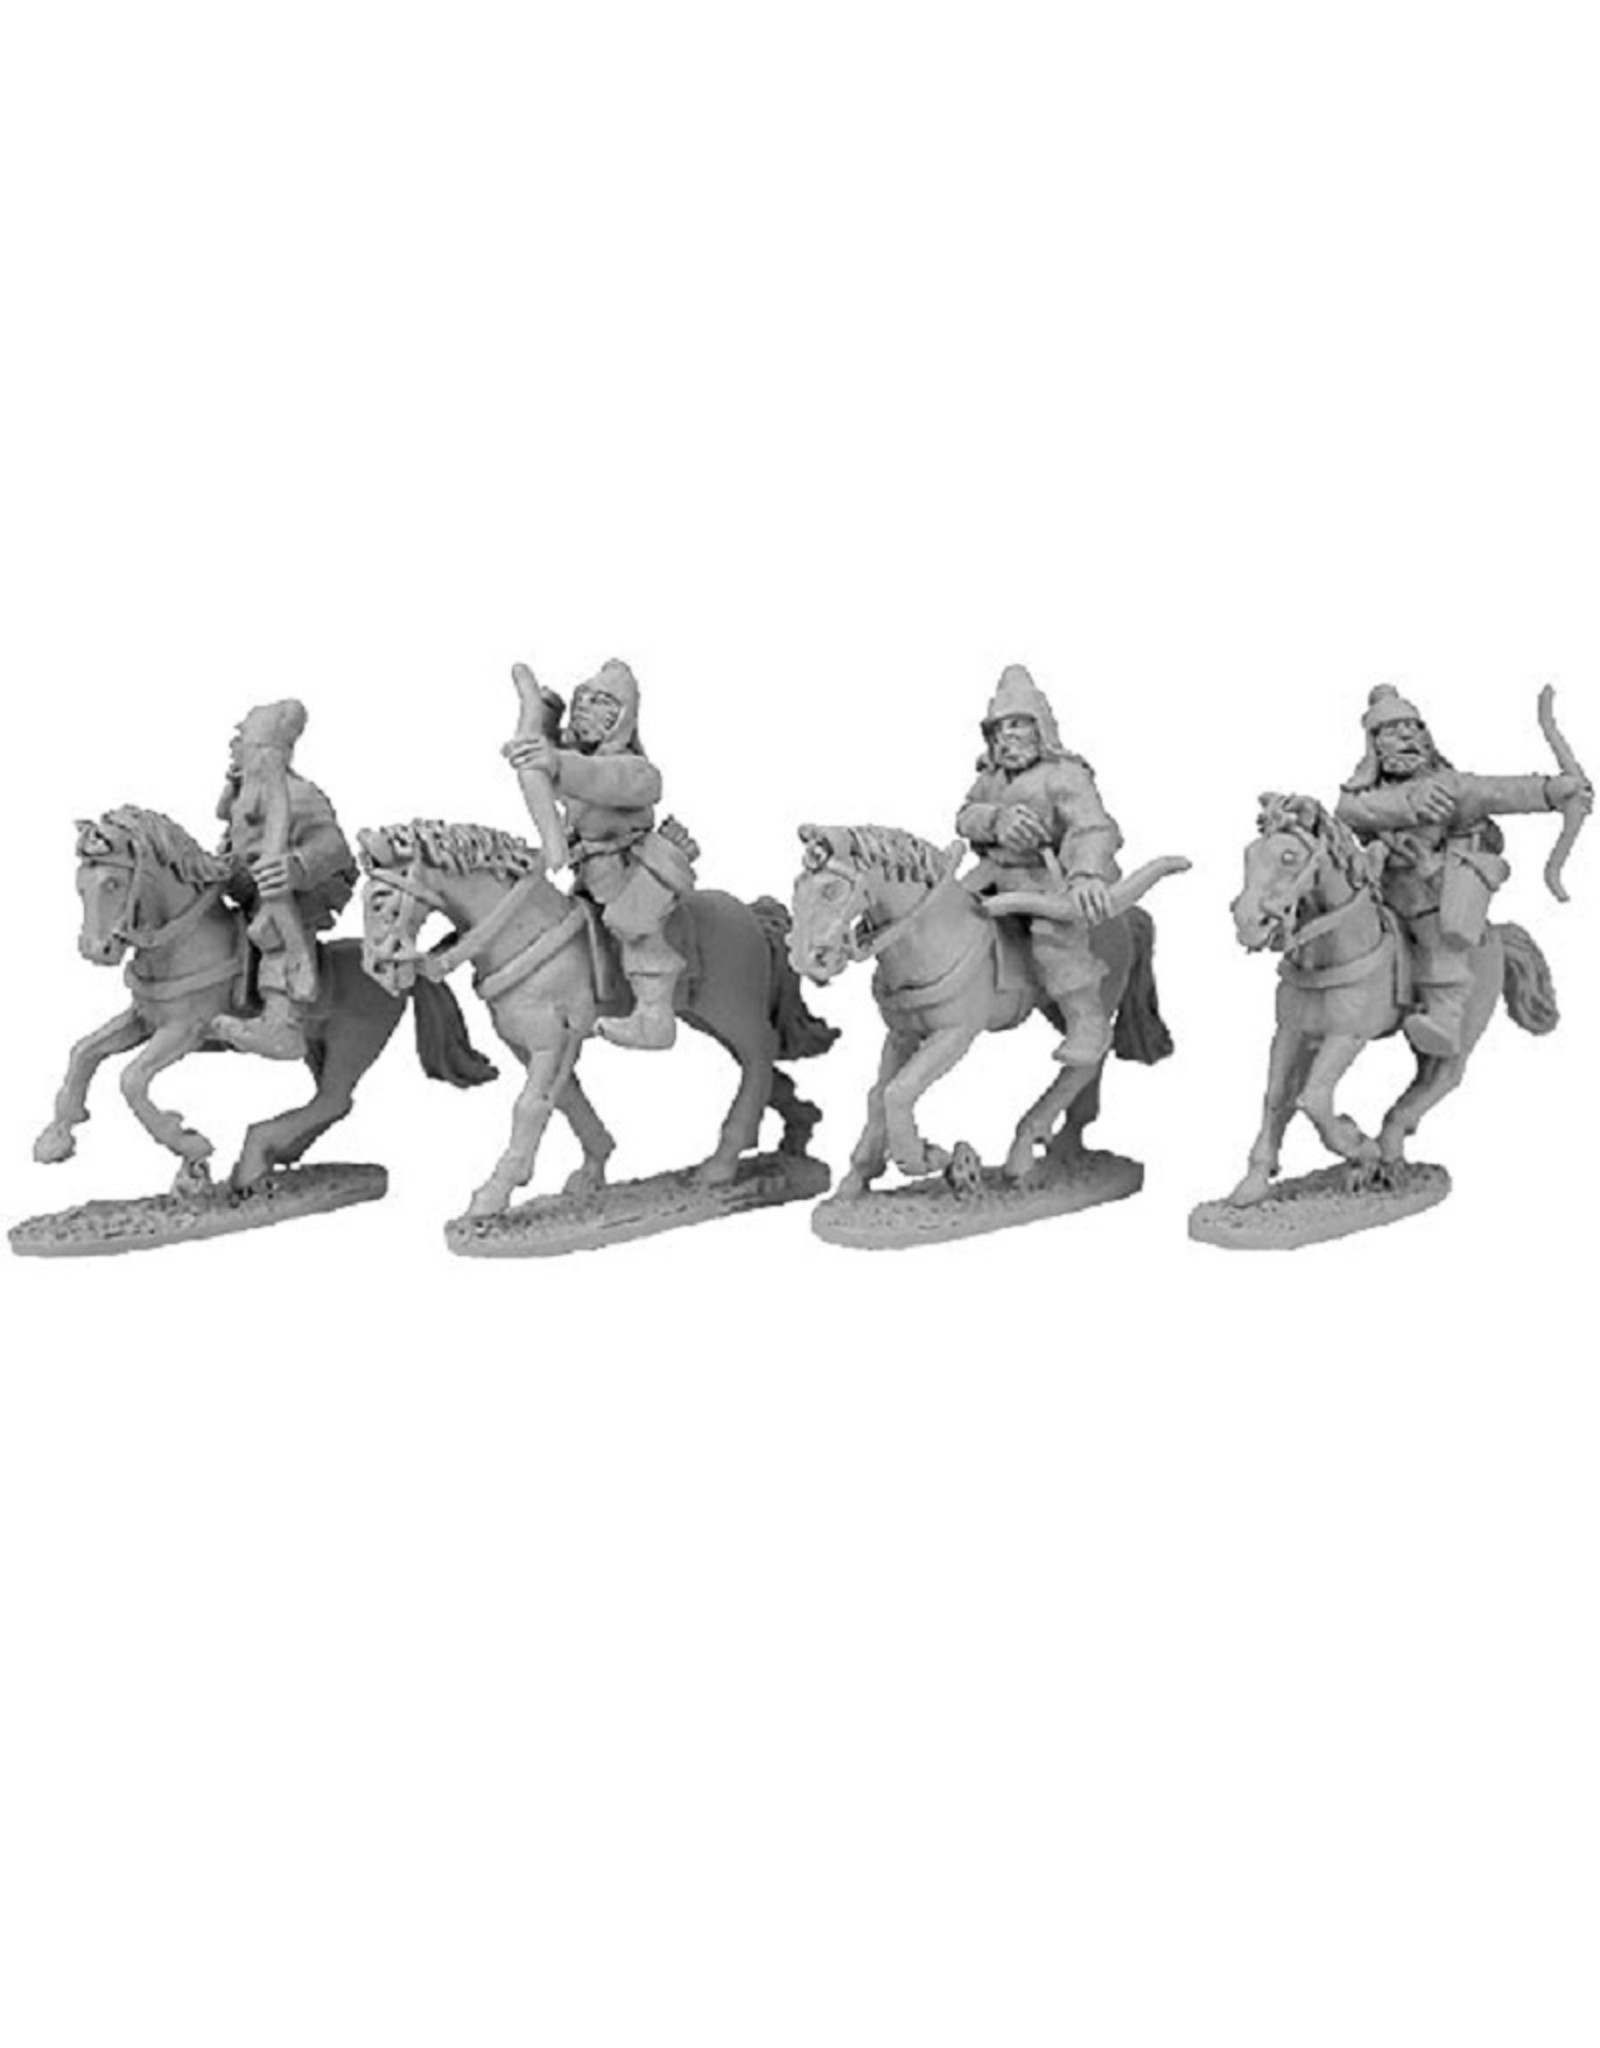 Xyston ANC20045 - Thracian Getic Horse Archers